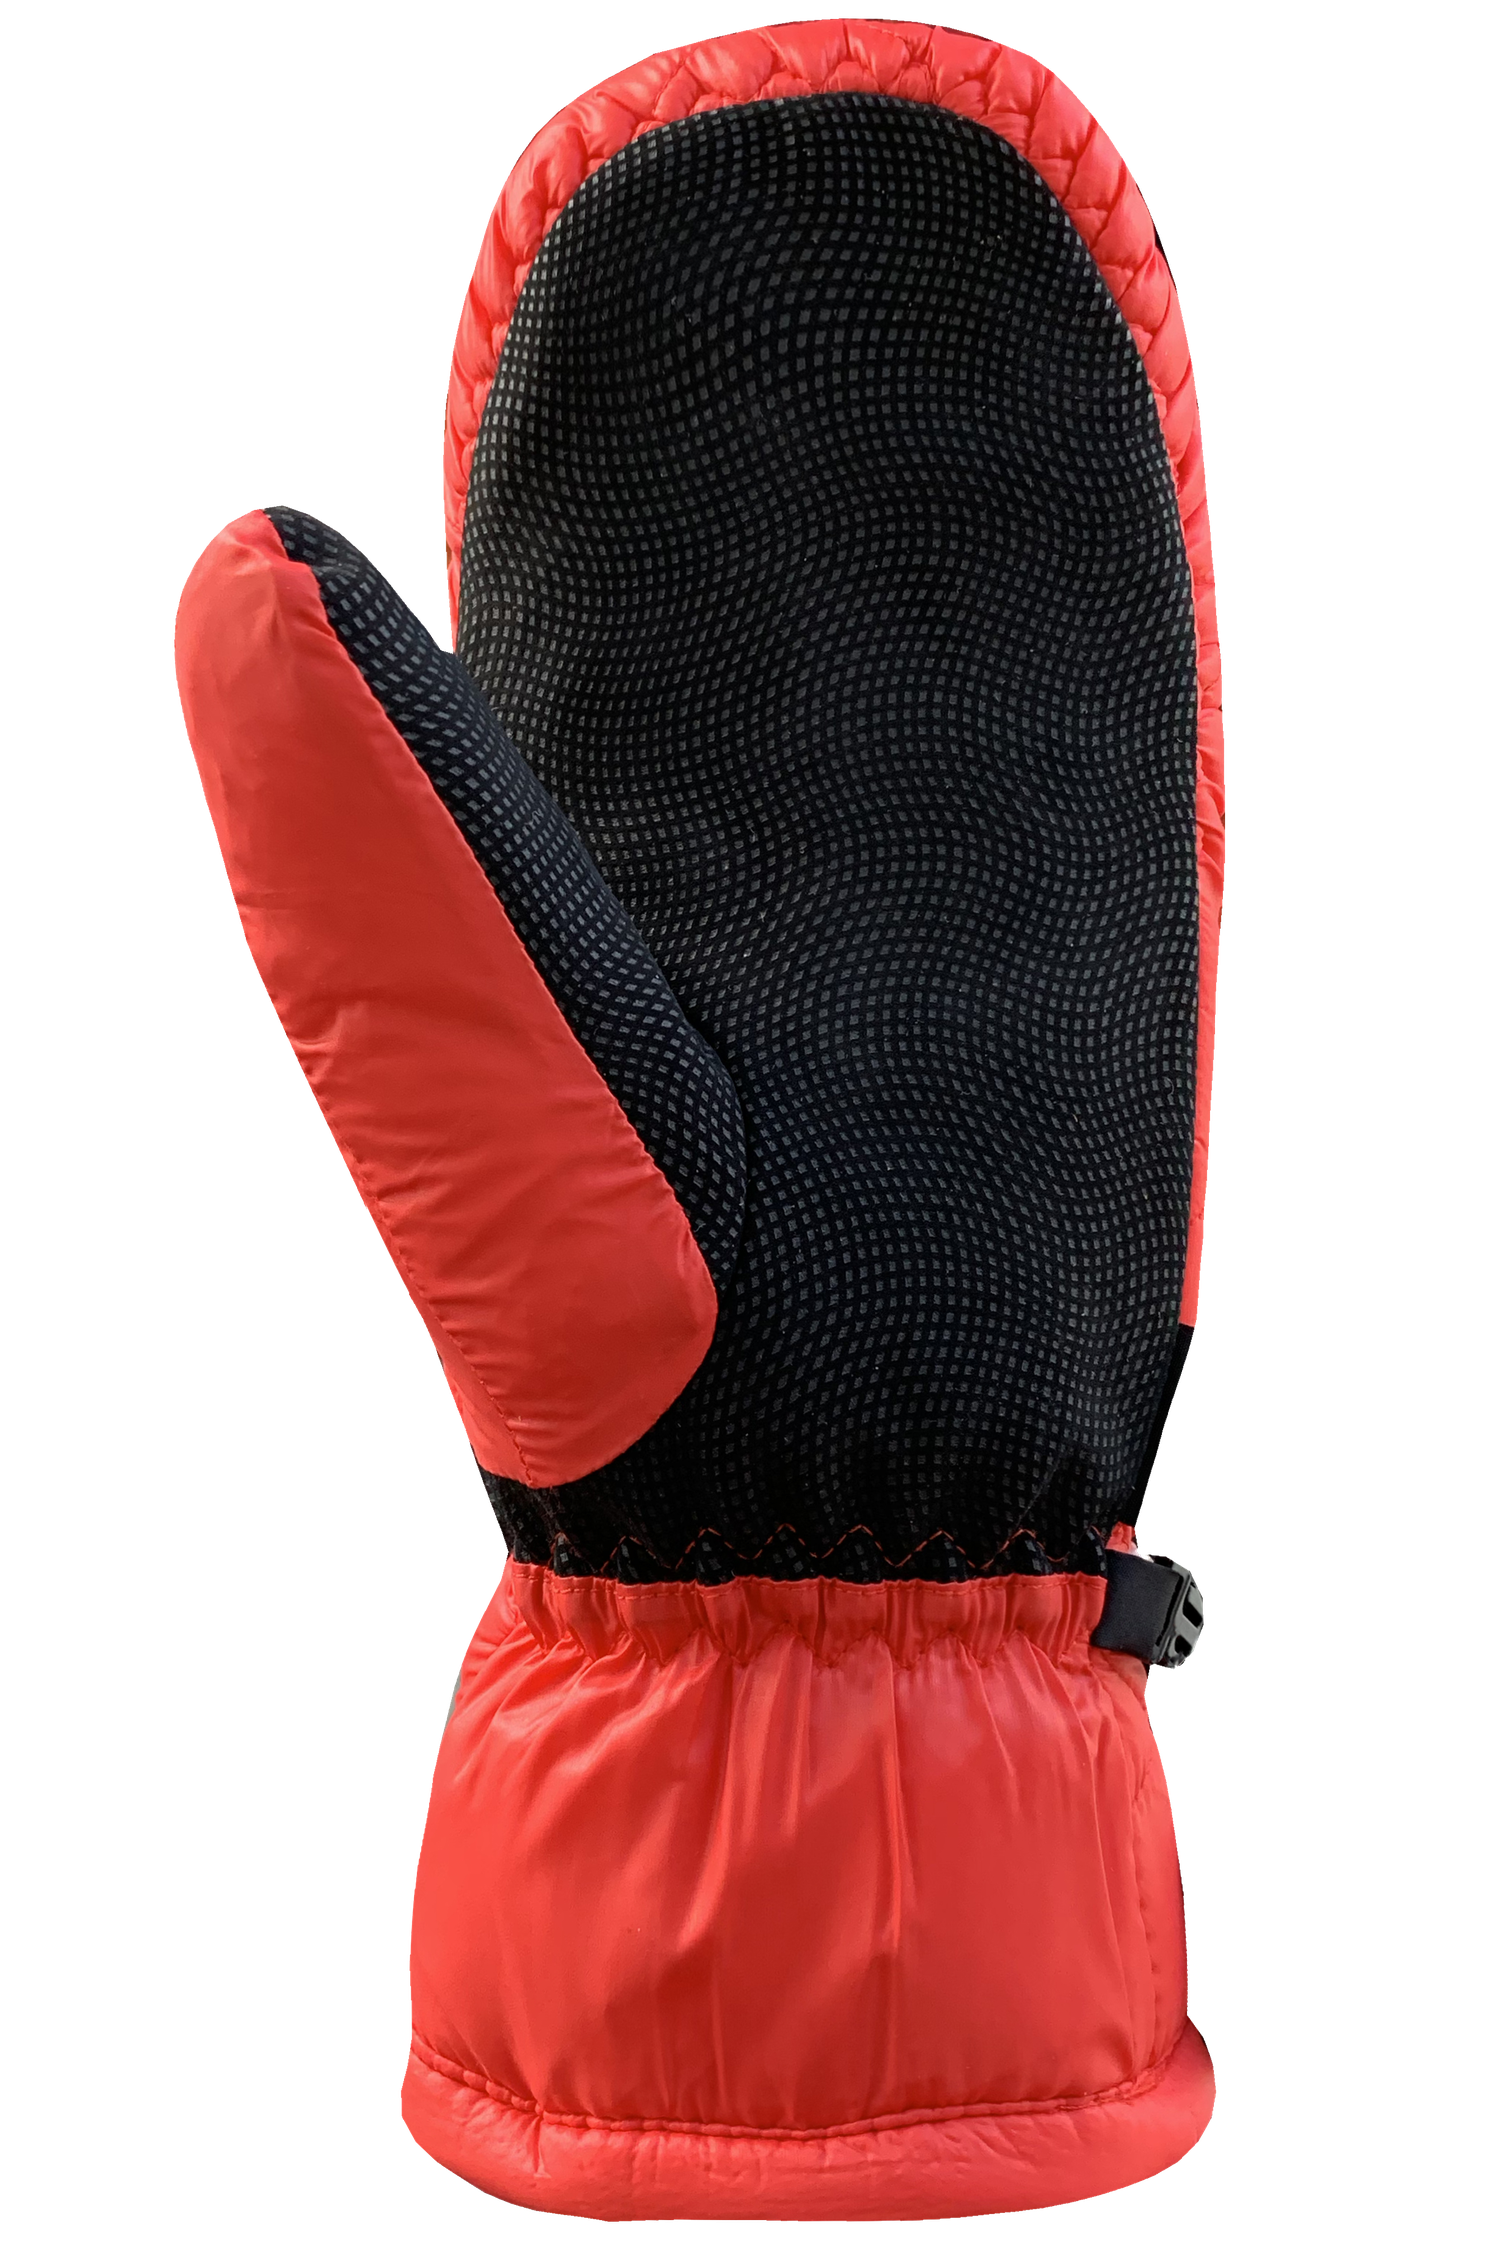 Sugarloaf 2.0 Mitts - Women, Red